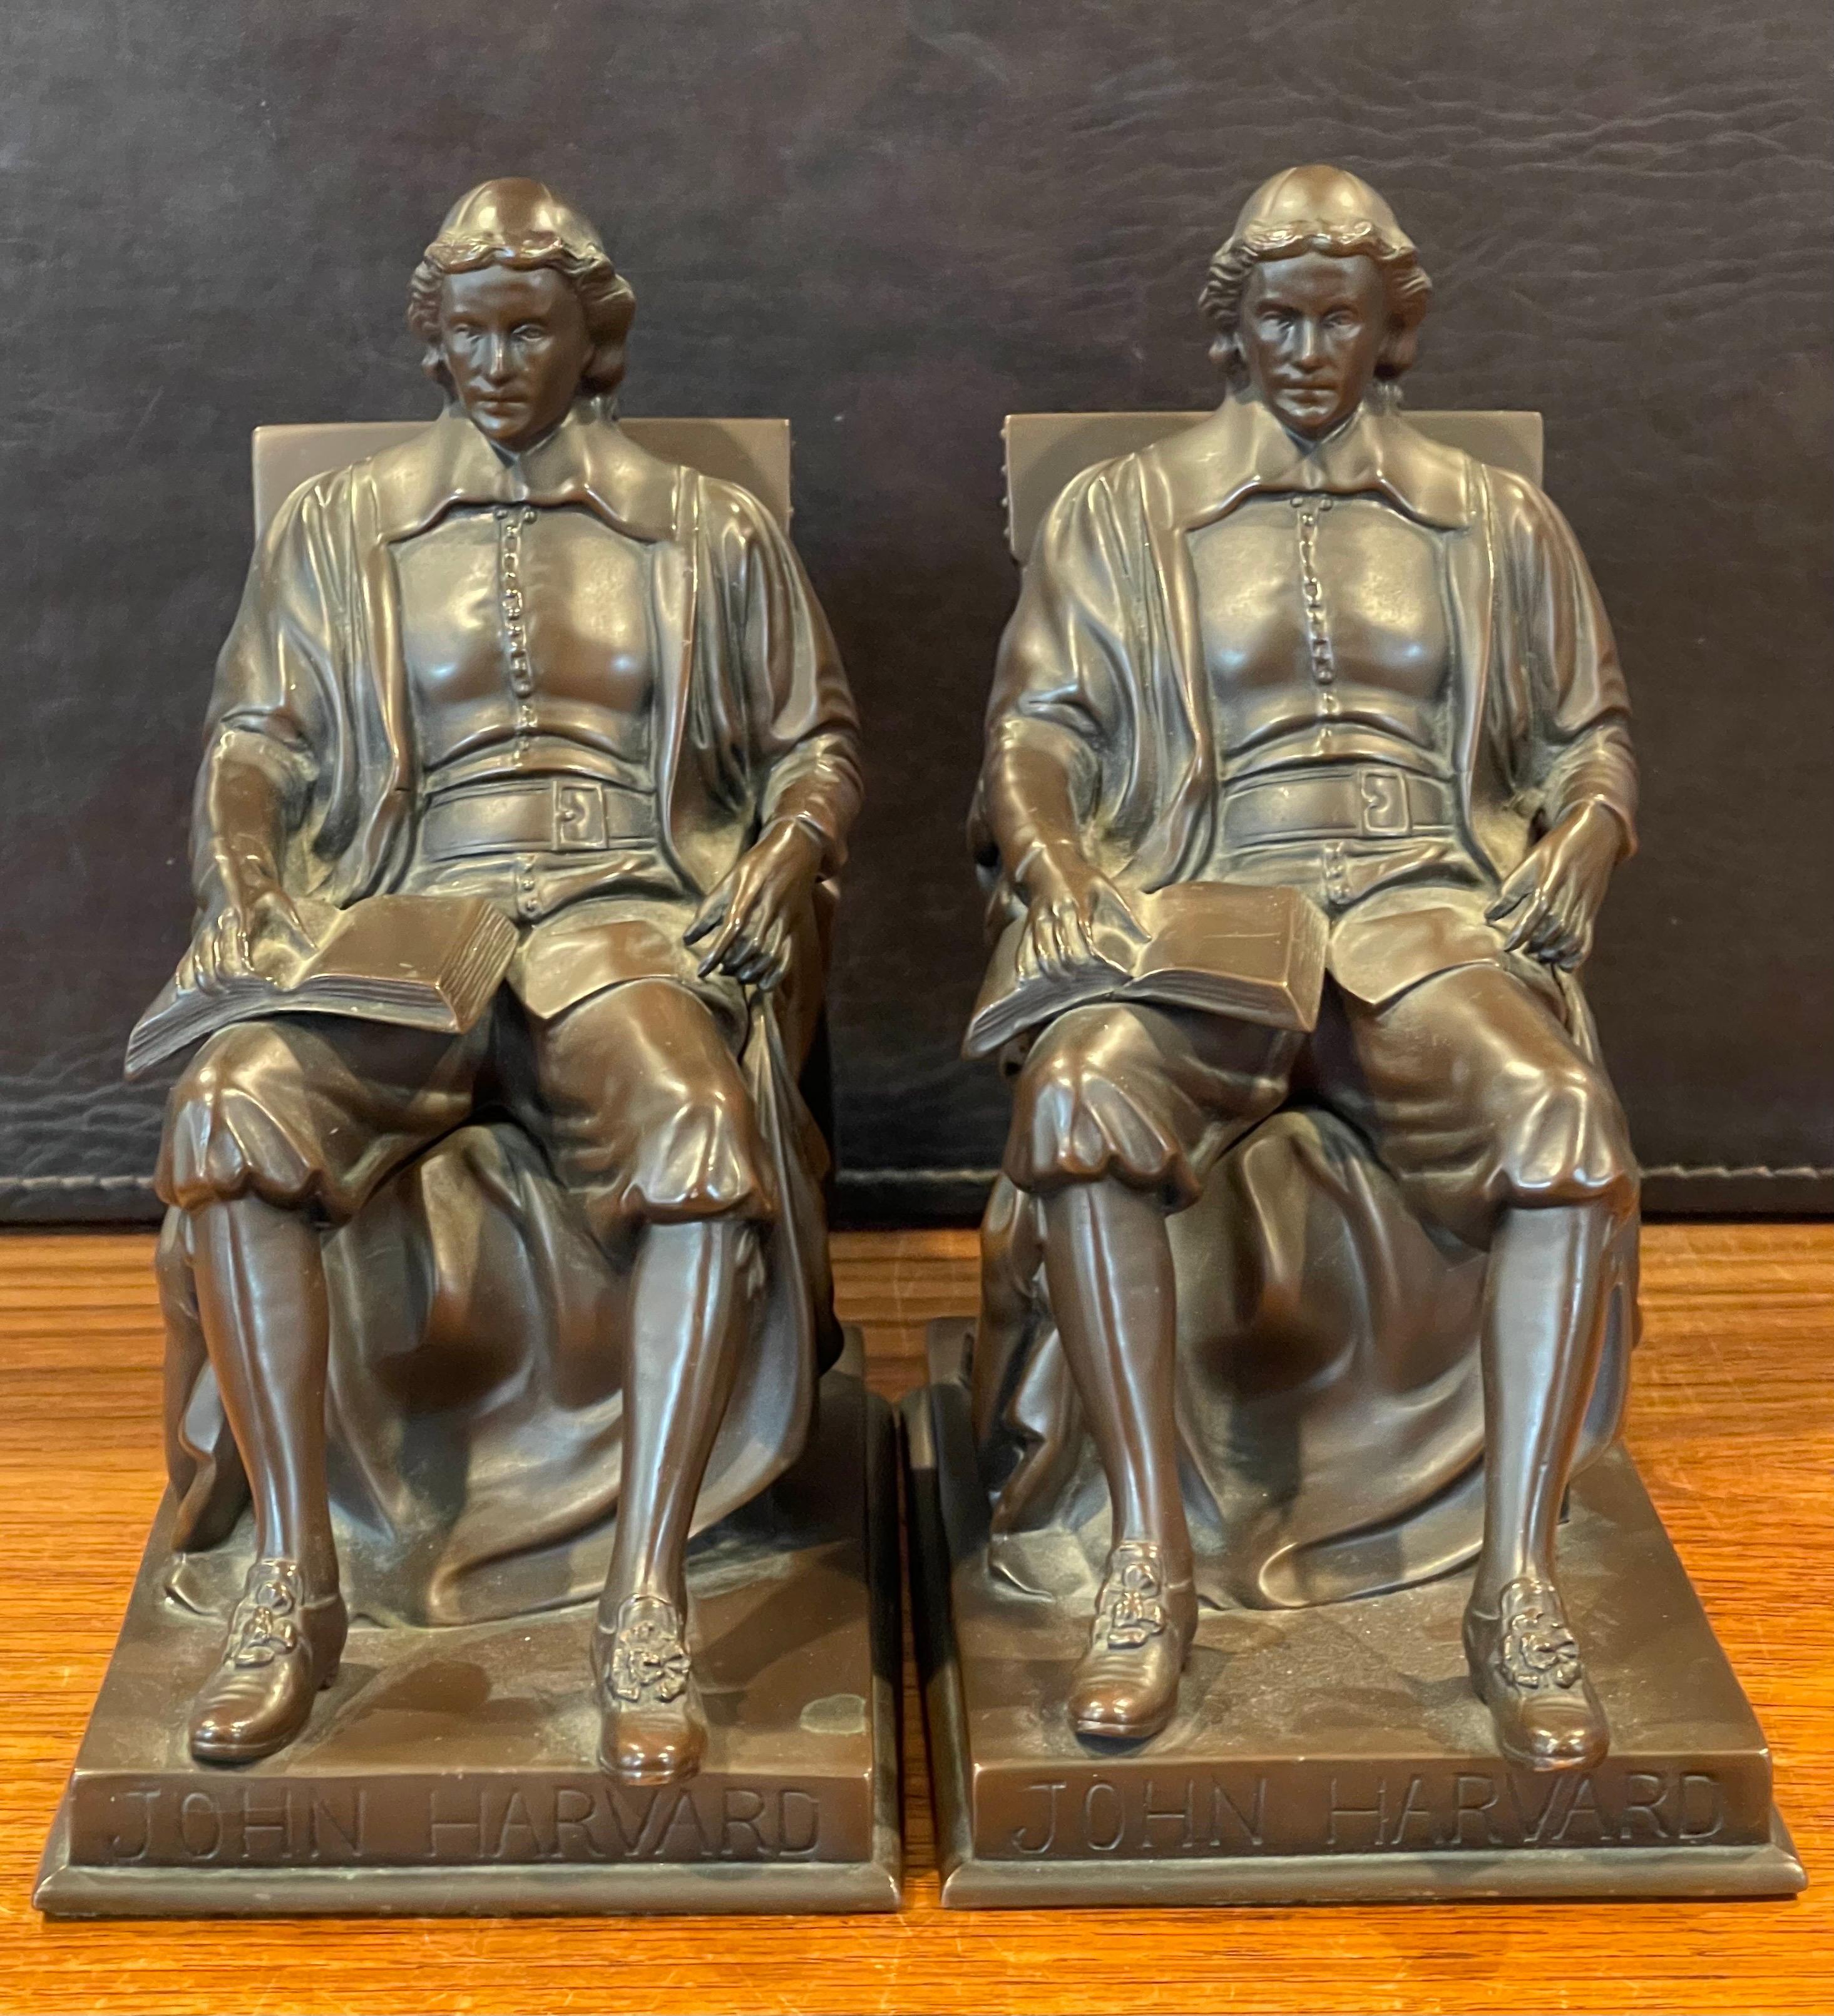 Pair of Vintage John Harvard Bronze Bookends by Jennings Brothers  3